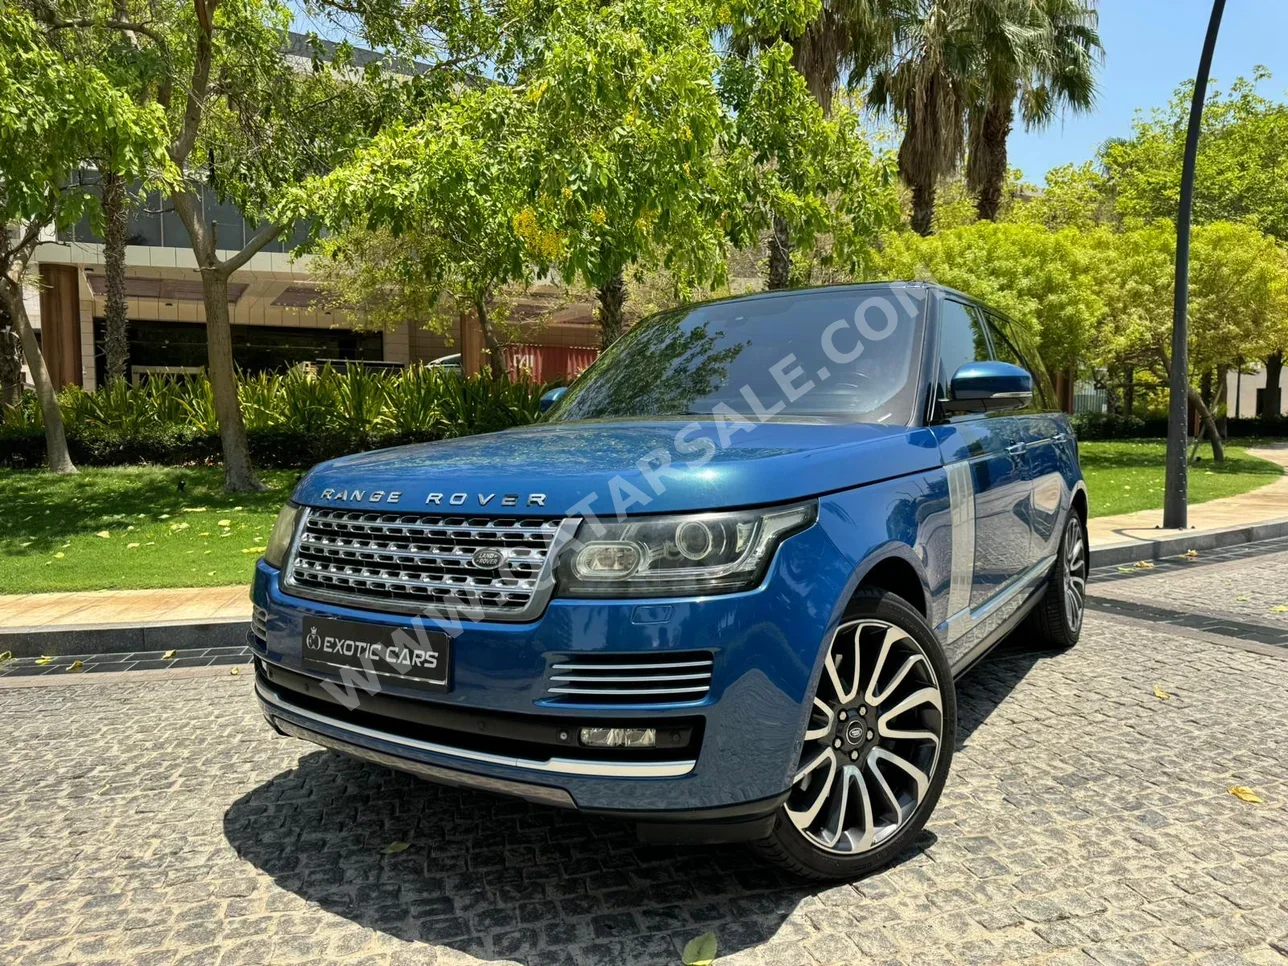 Land Rover  Range Rover  Vogue  Autobiography  2014  Automatic  81,000 Km  8 Cylinder  Four Wheel Drive (4WD)  SUV  Blue